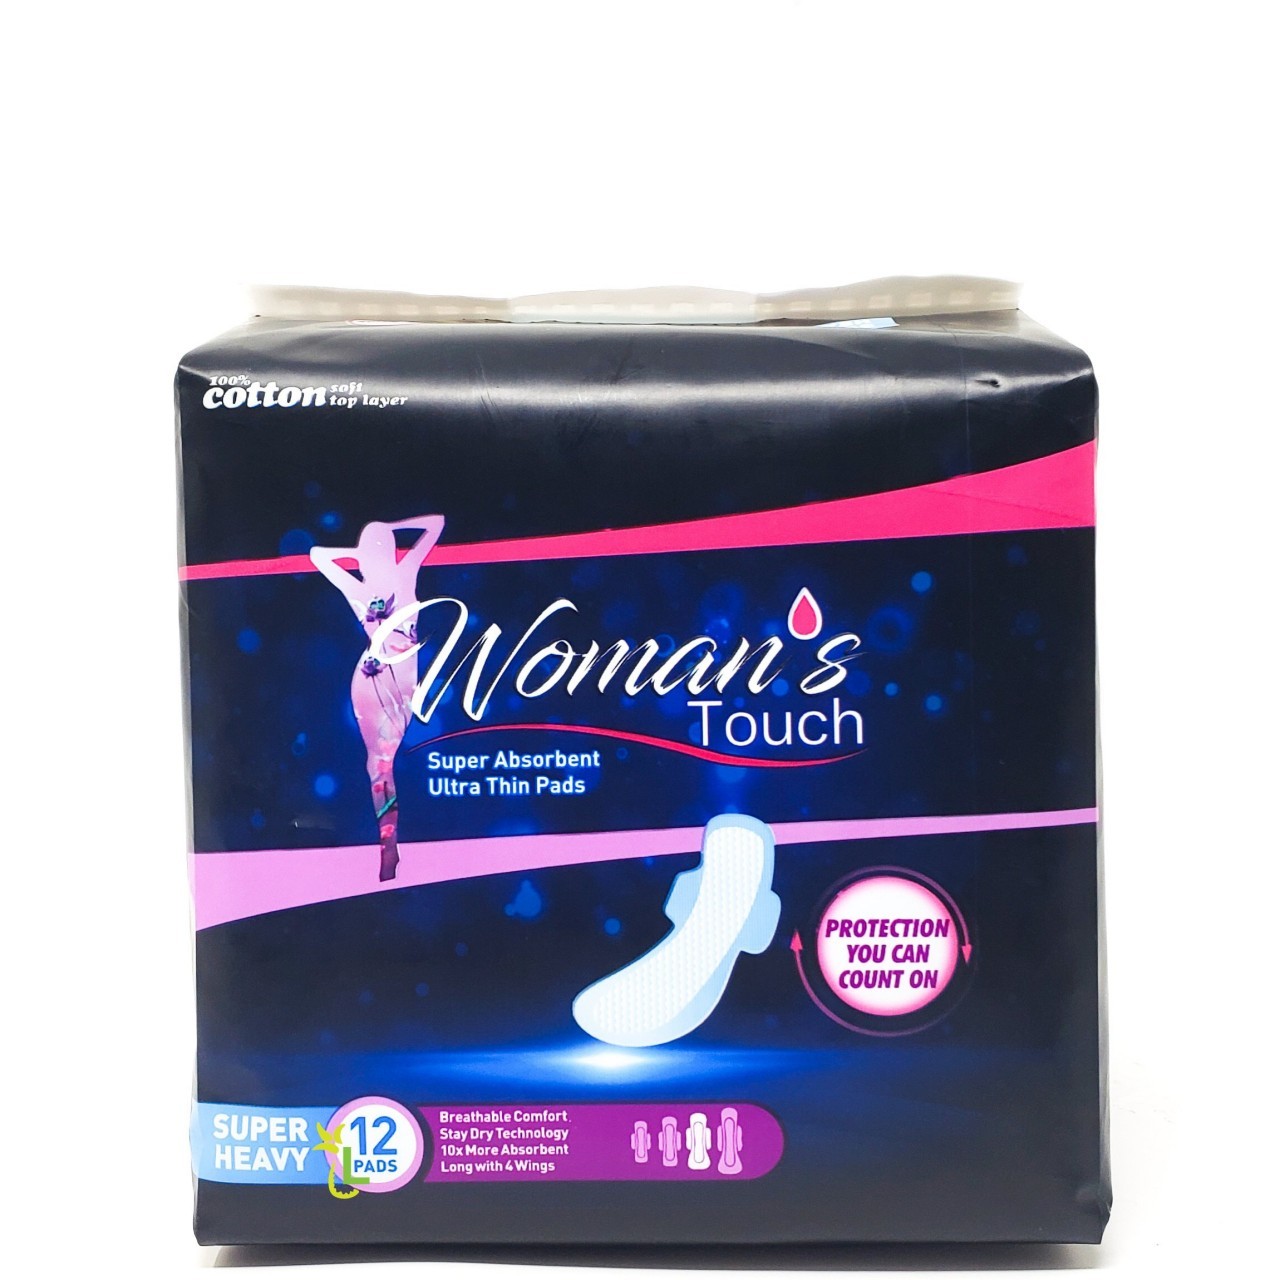 WOMANS TOUCH PADS SUPER HEAVY 12s